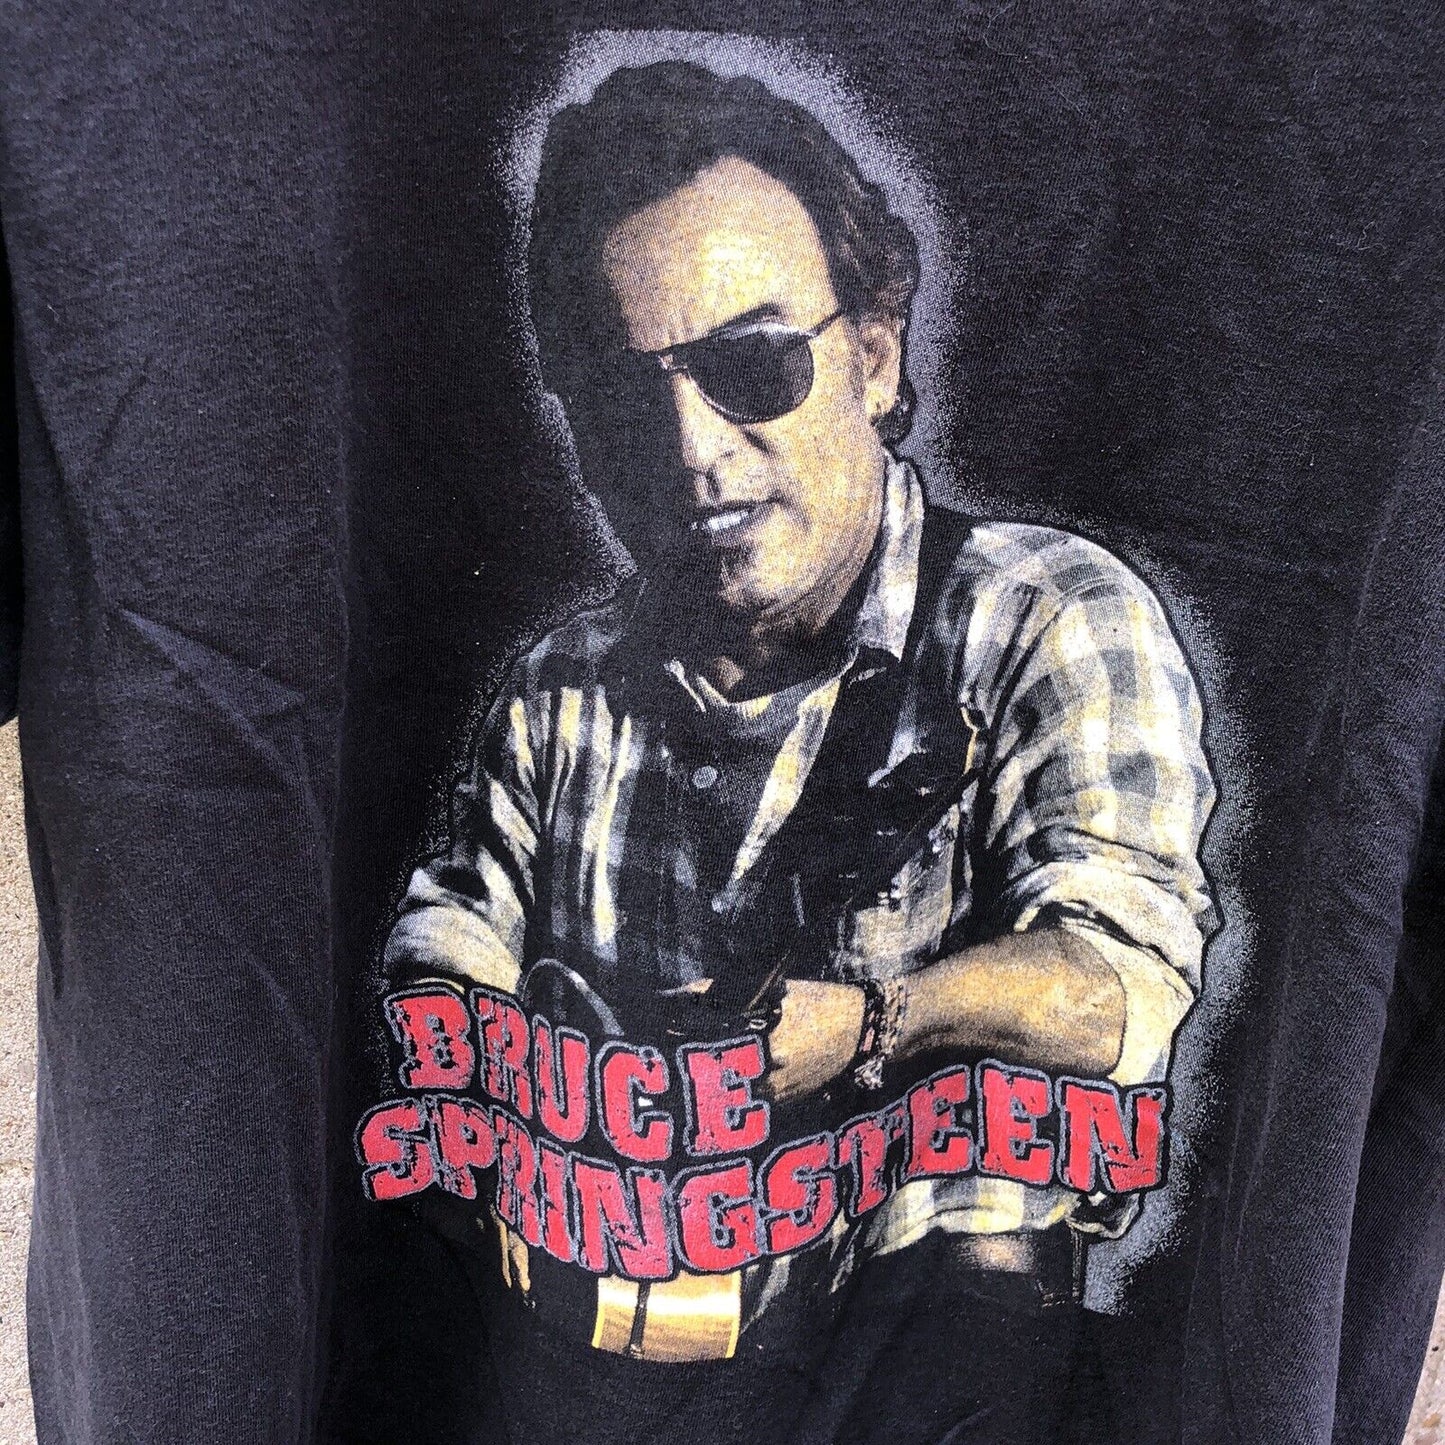 2009 BRUCE SPRINGSTEEN & THE E STREET BAND Last Shows GIANTS STADIUM Large Shirt